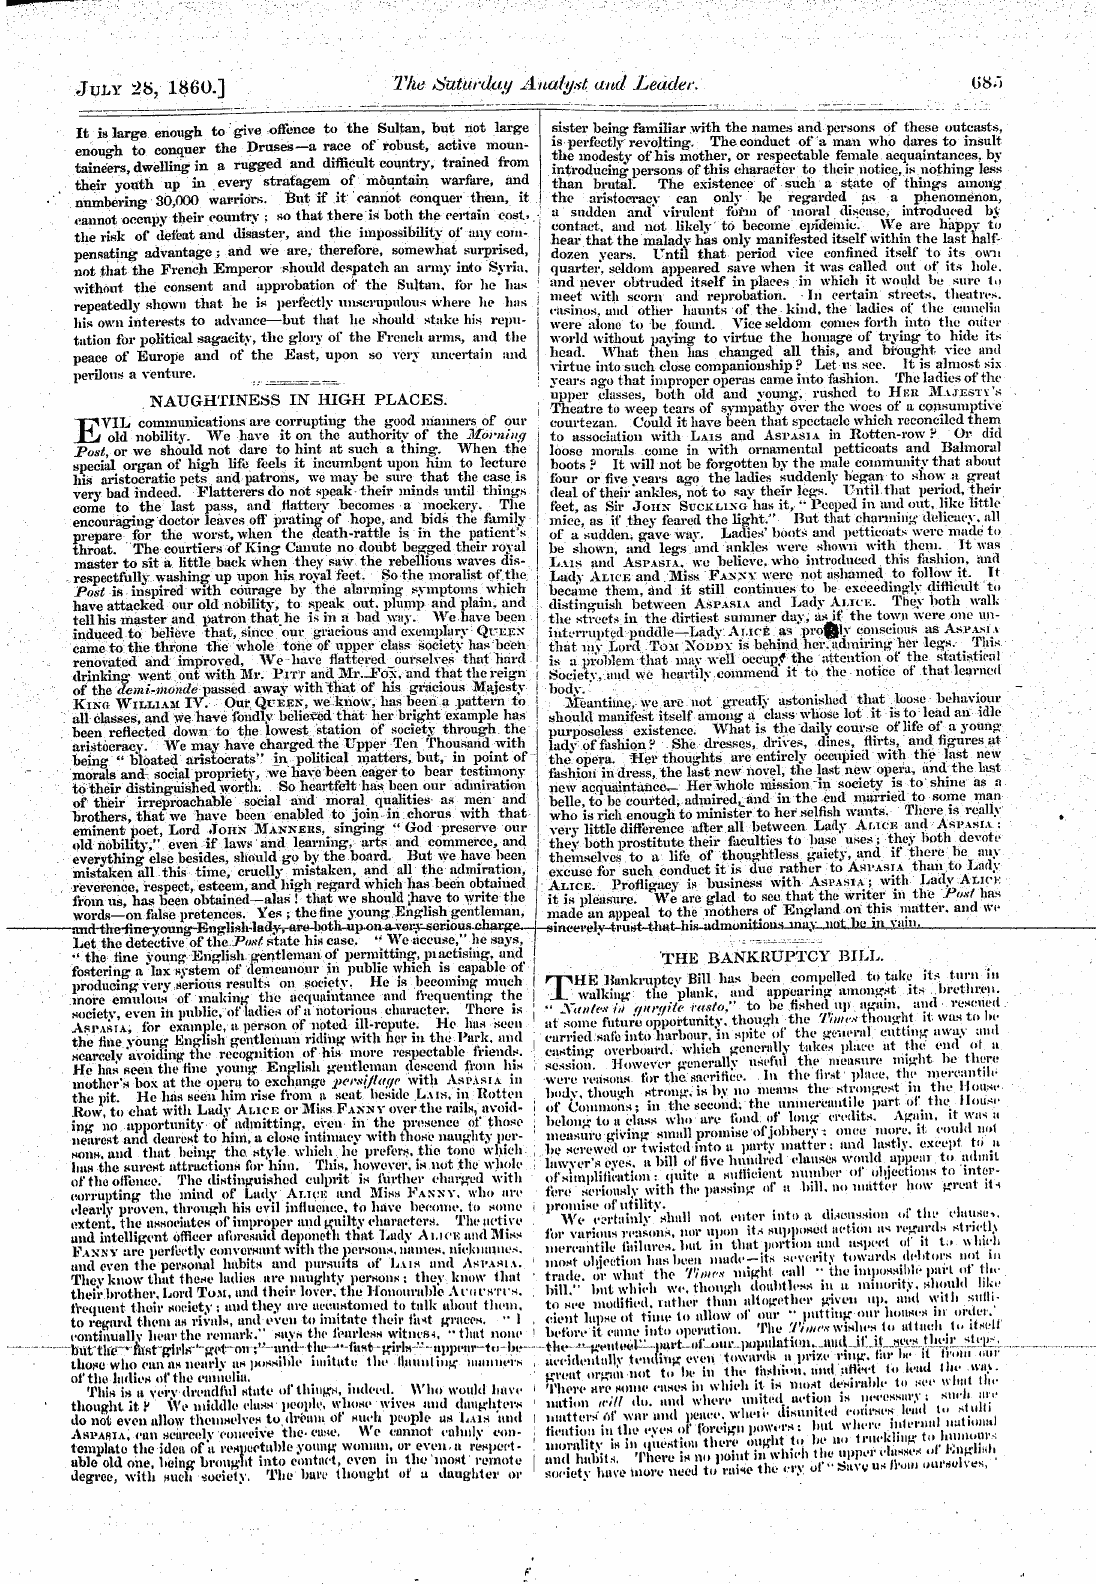 Leader (1850-1860): jS F Y, 1st edition - The Bankruptcy Bill.